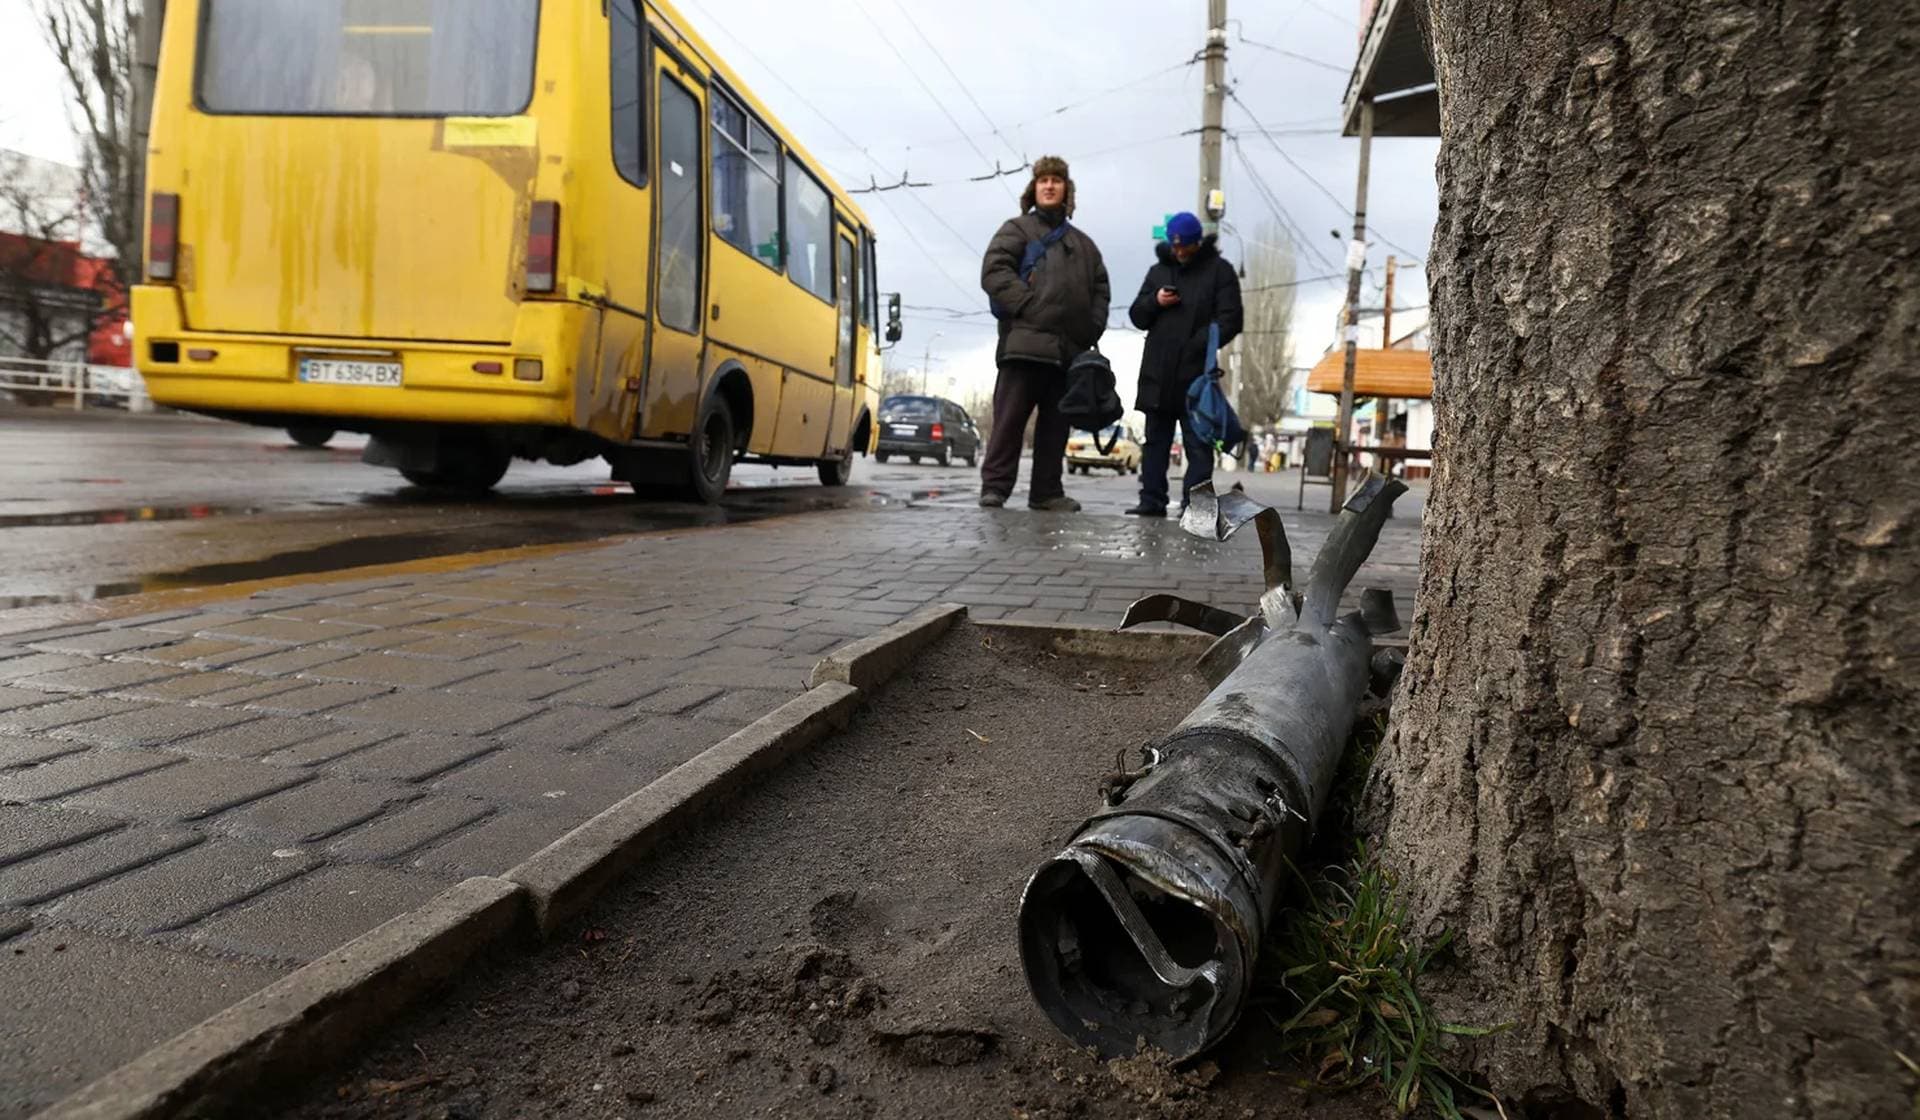 A part of a rocket in front of a bus station damaged after shelling in Kherson